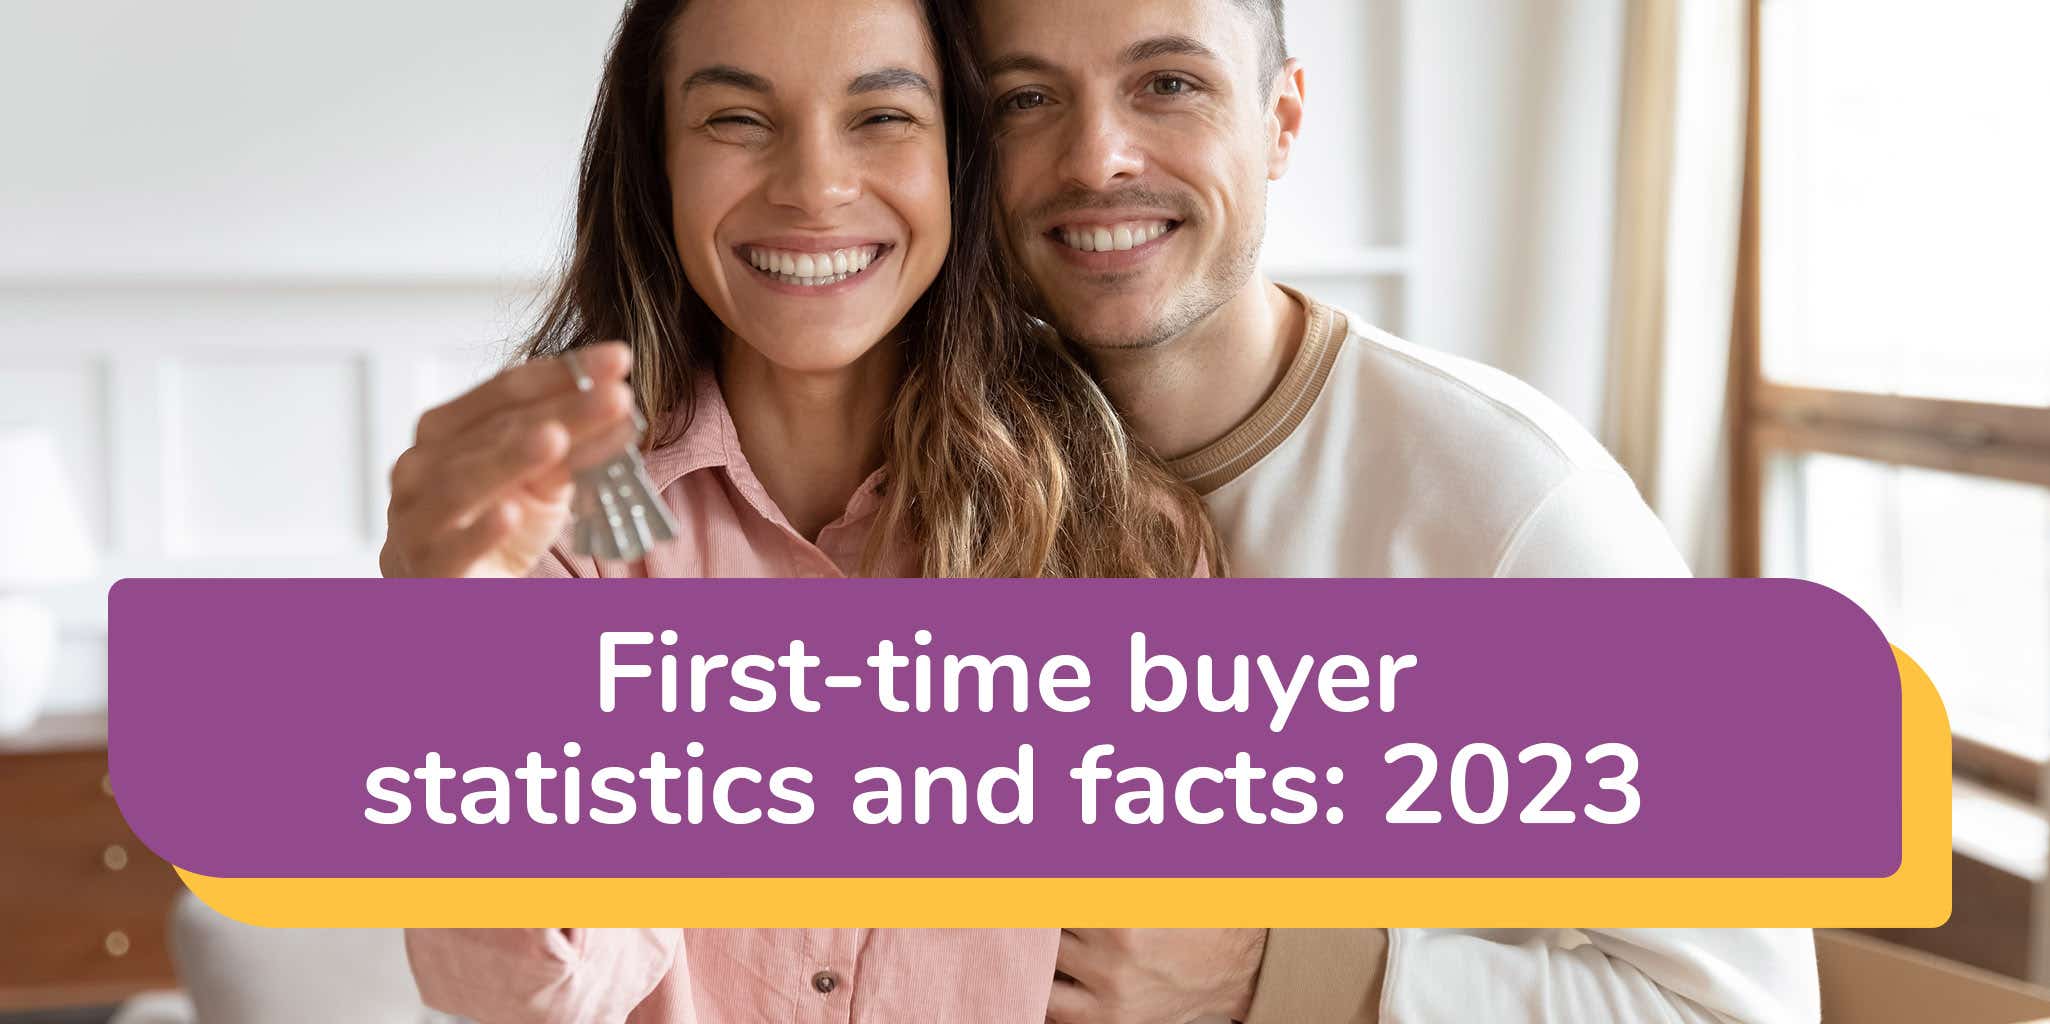 First-time buyer statistics and facts: 2023